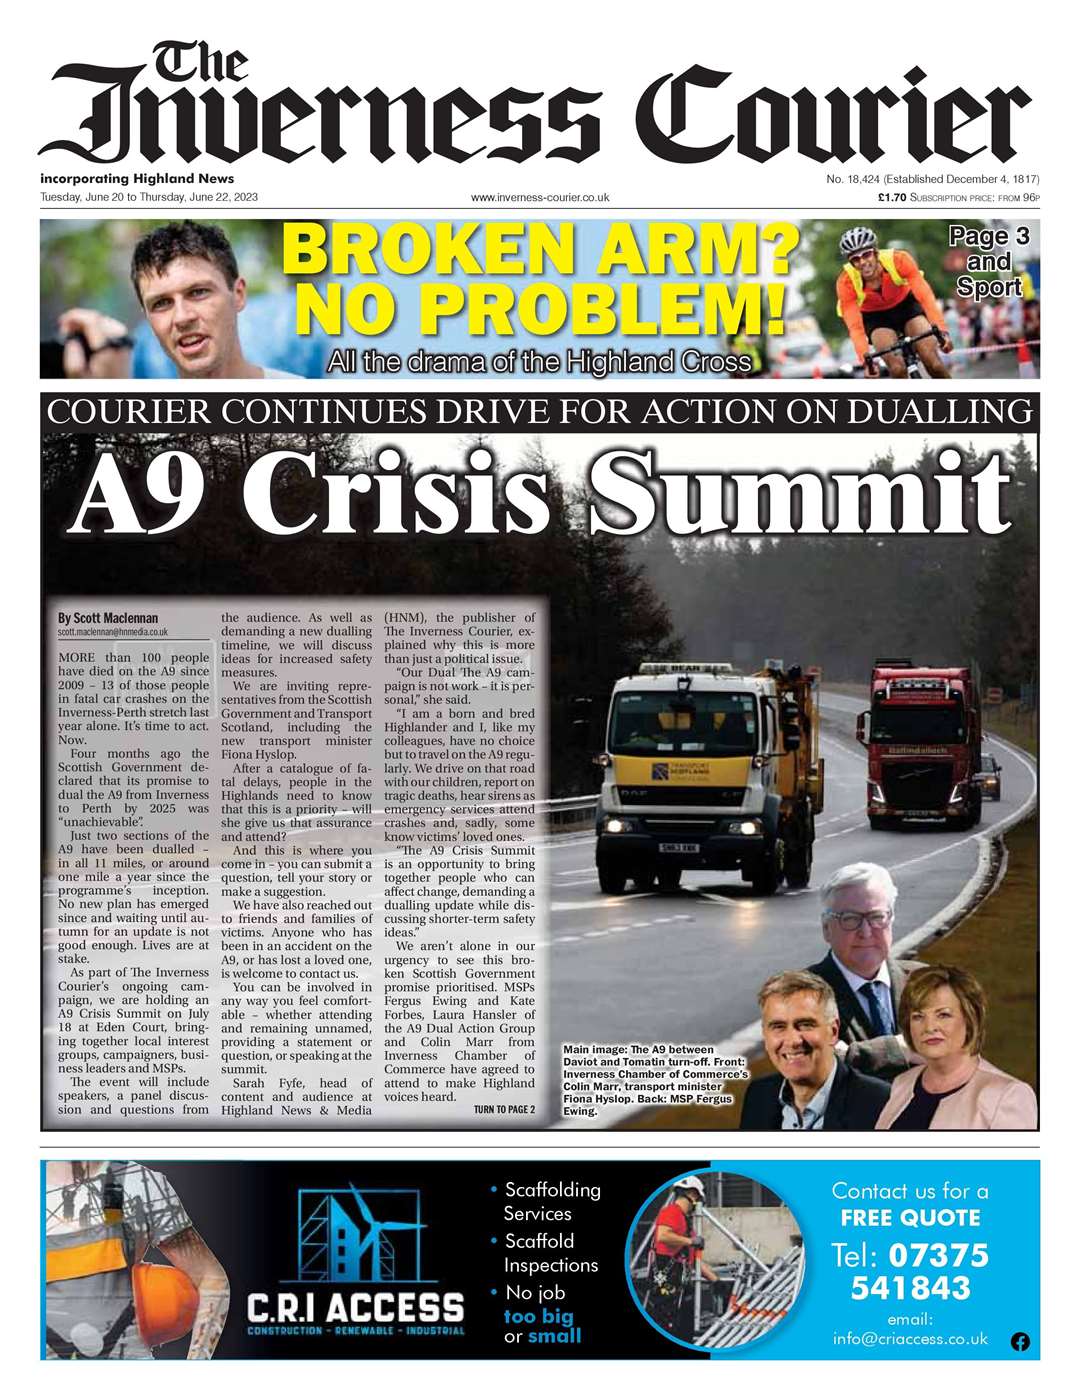 The Inverness Courier, June 20, front page.